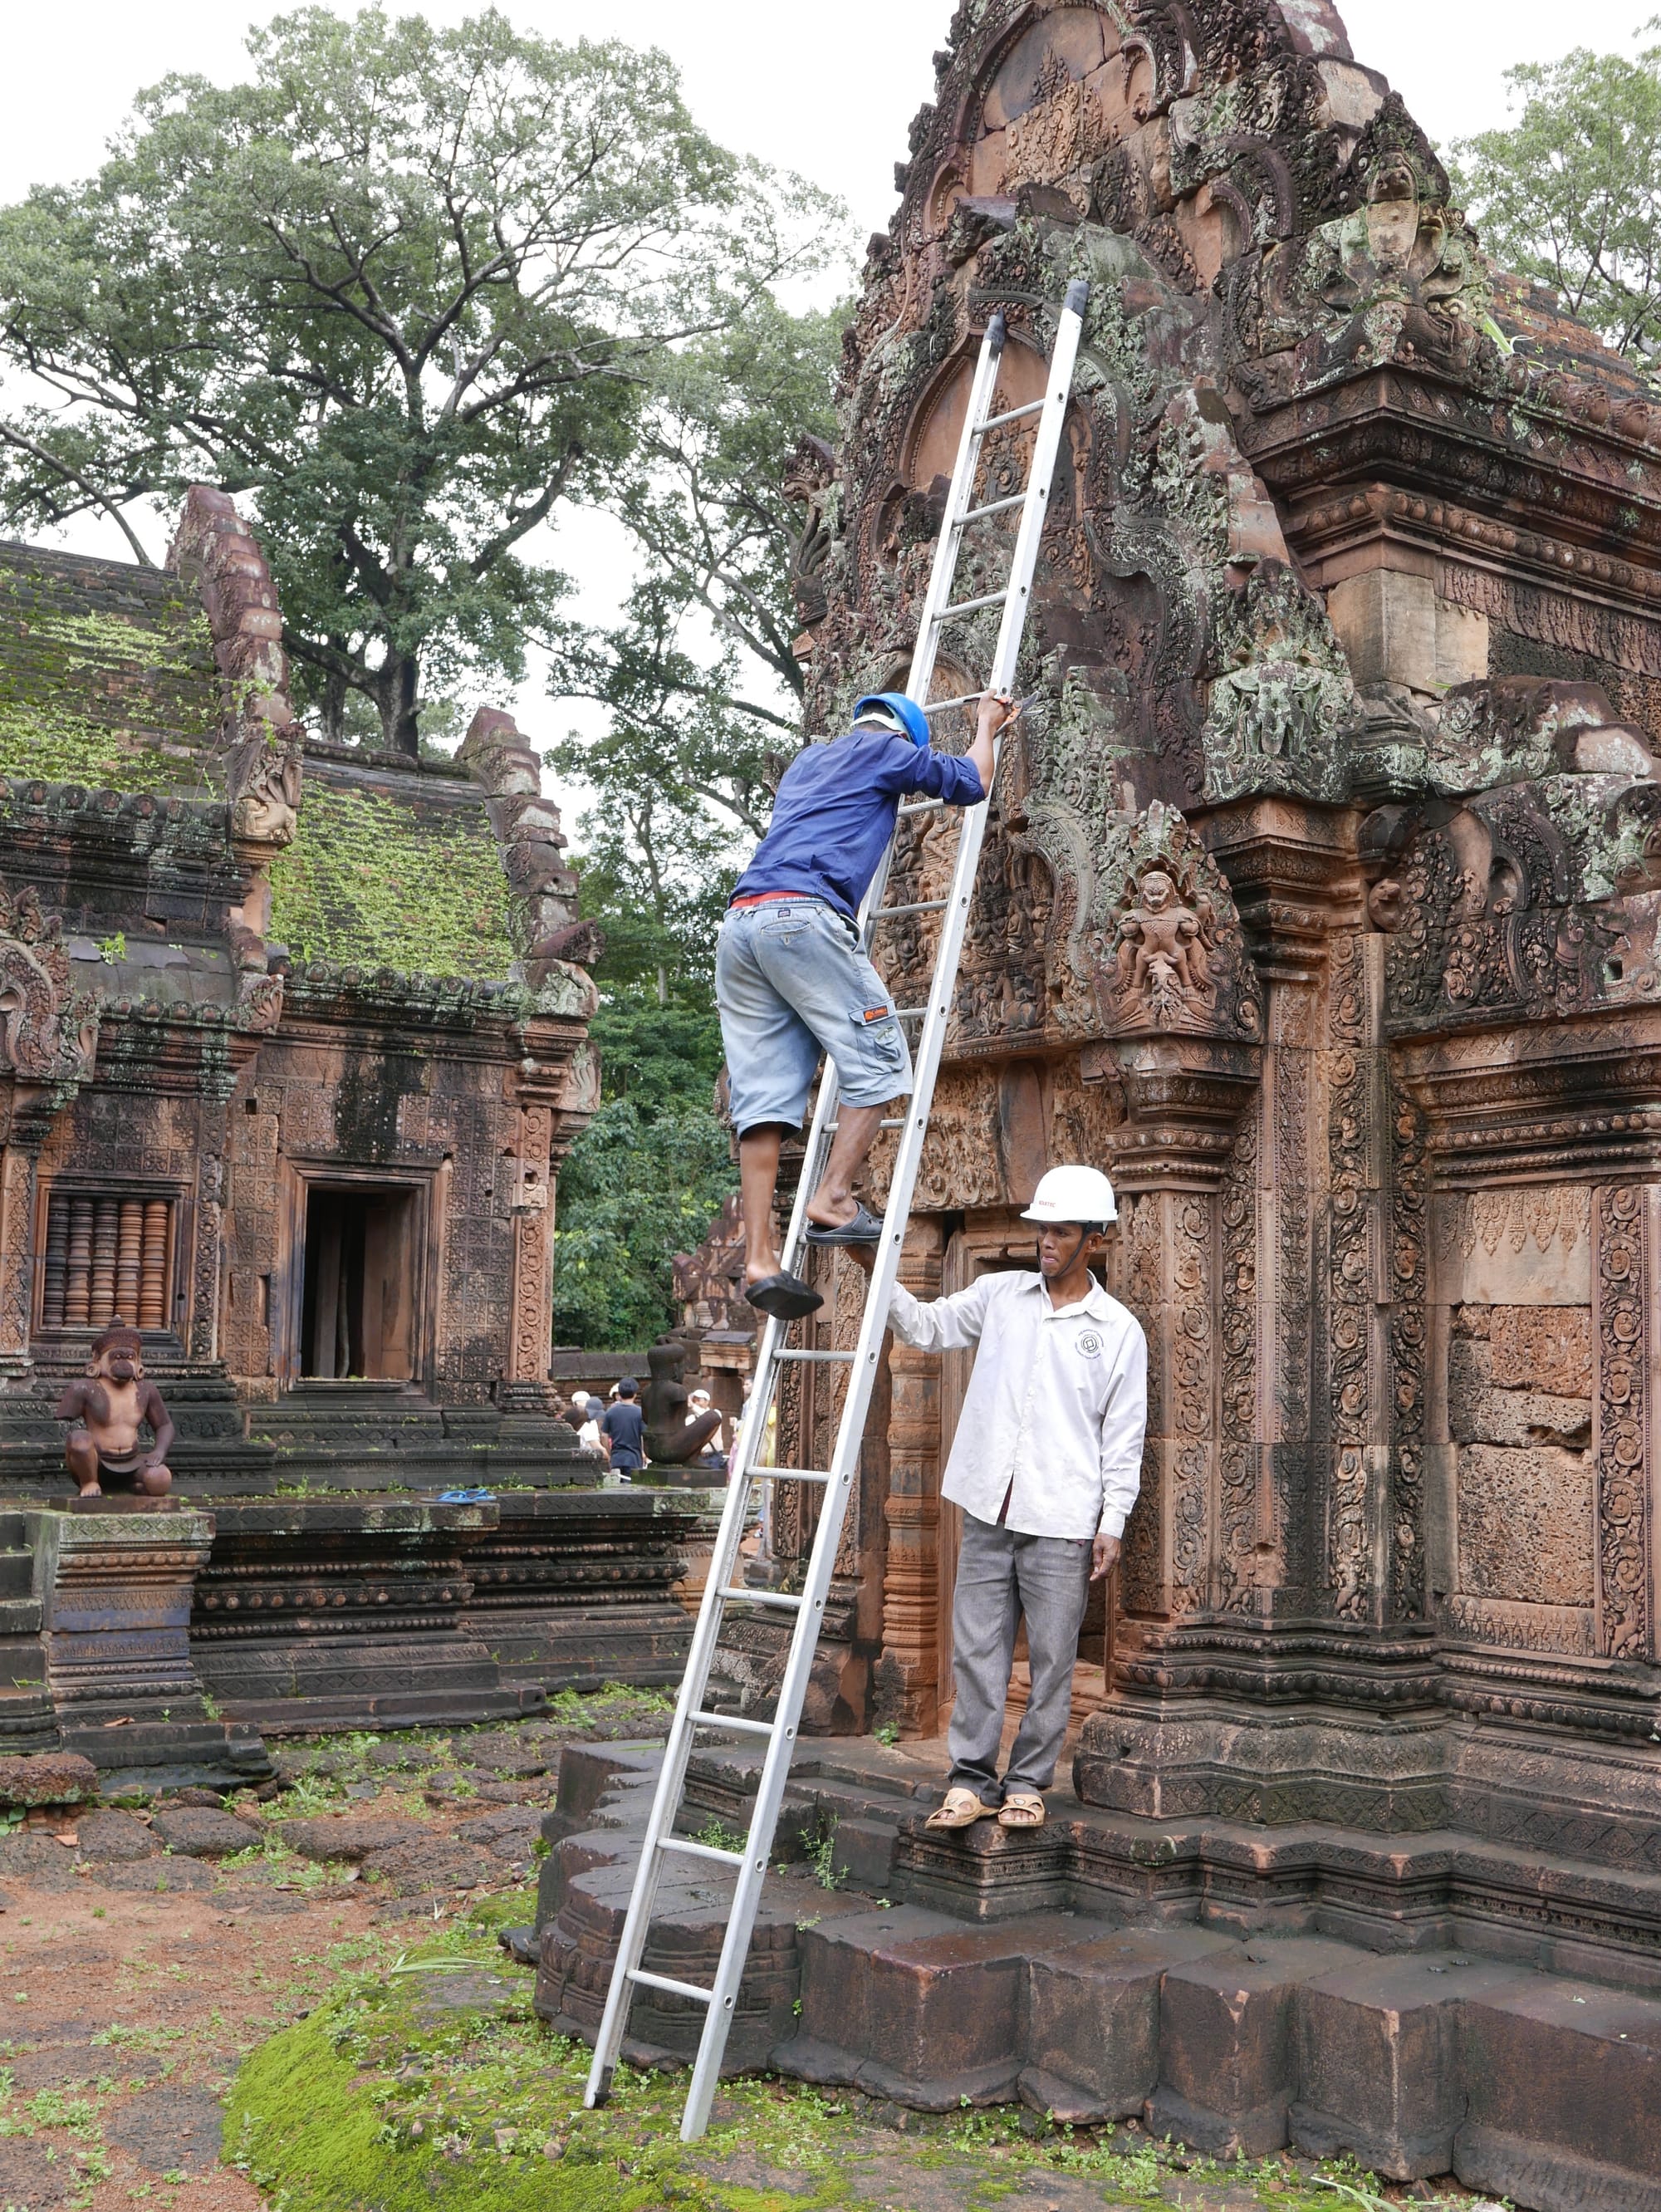 Photo by Author — restoration and conservation work at Banteay Srei Temple (ប្រាសាទបន្ទាយស្រី), Angkor Archaeological Park, Angkor, Cambodia